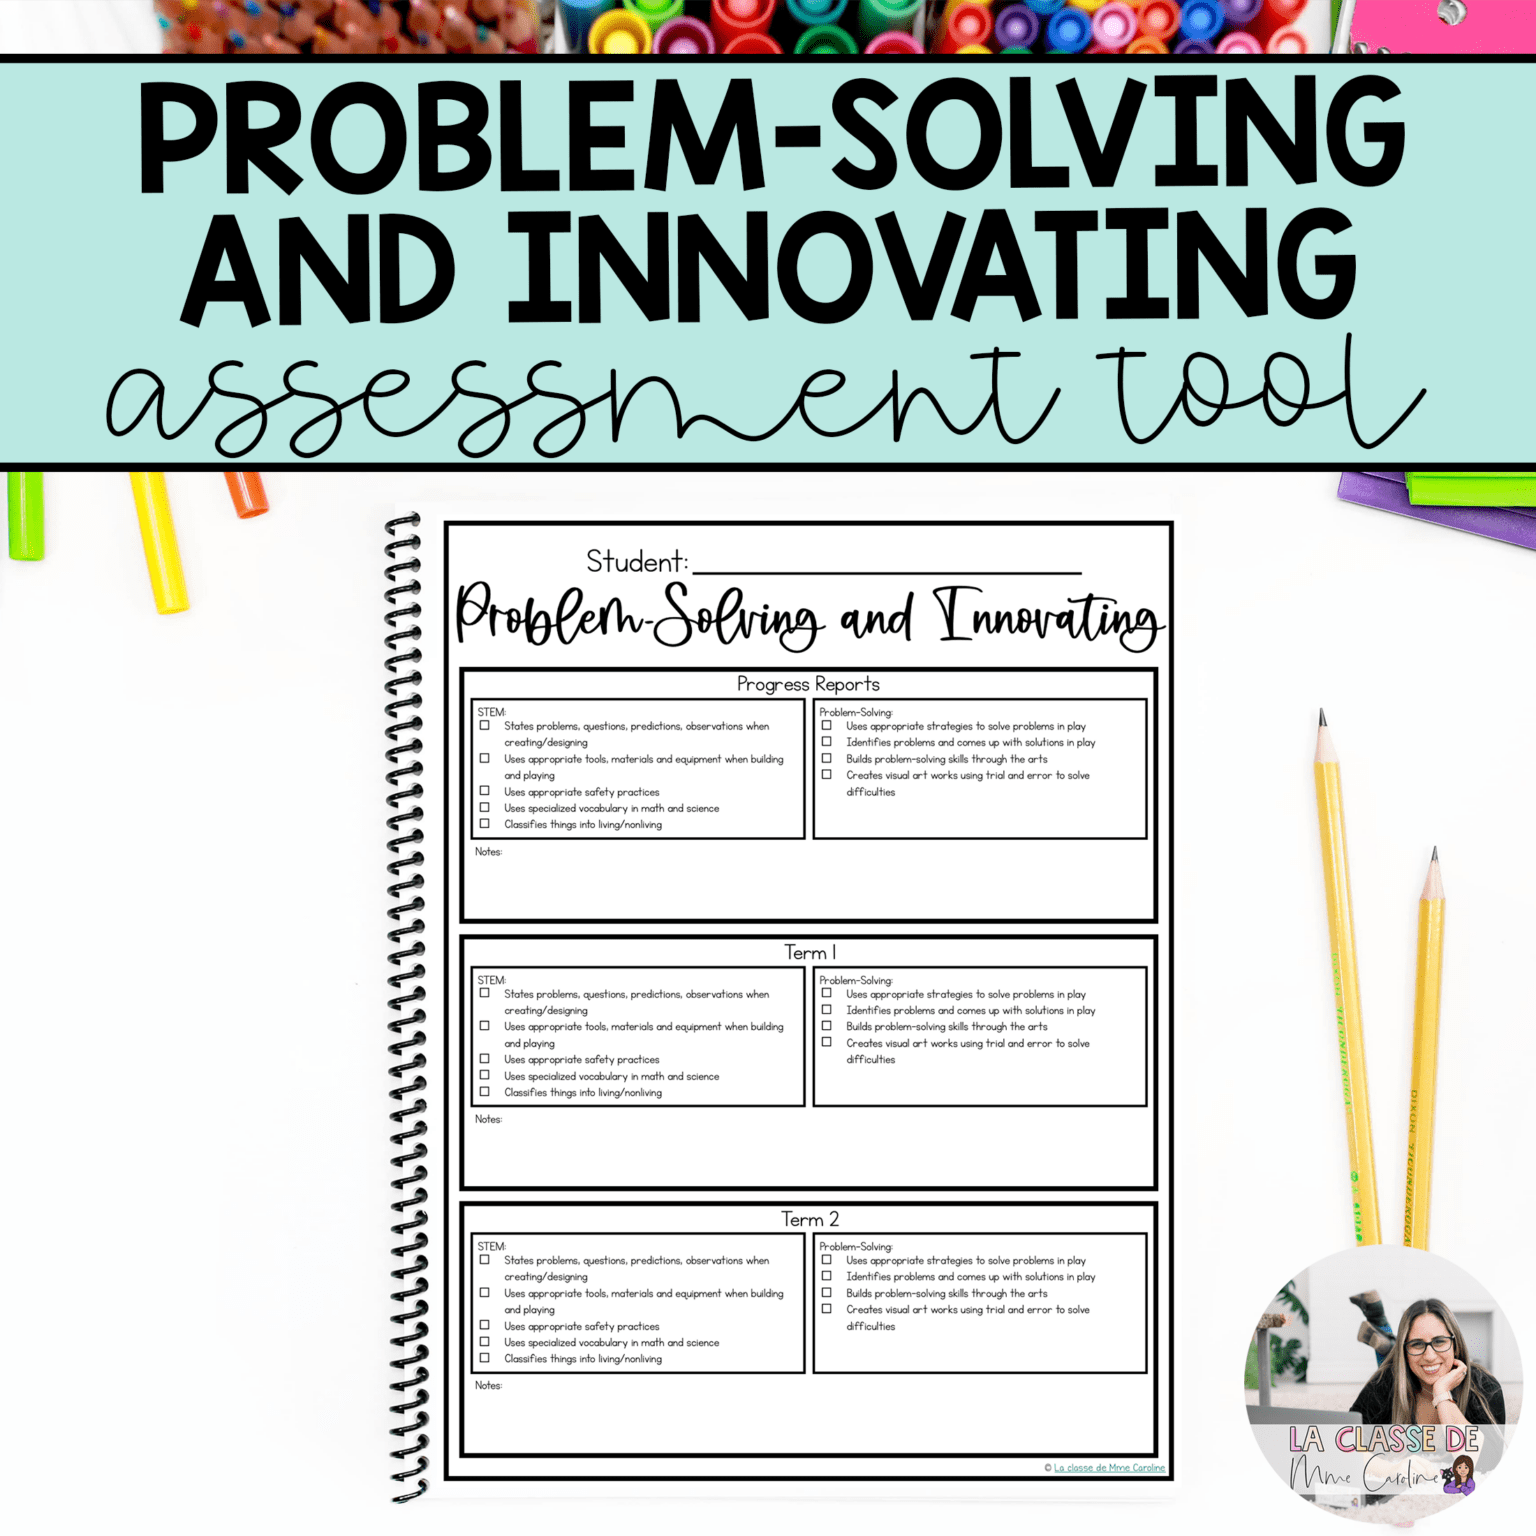 examples of problem solving and innovating in kindergarten